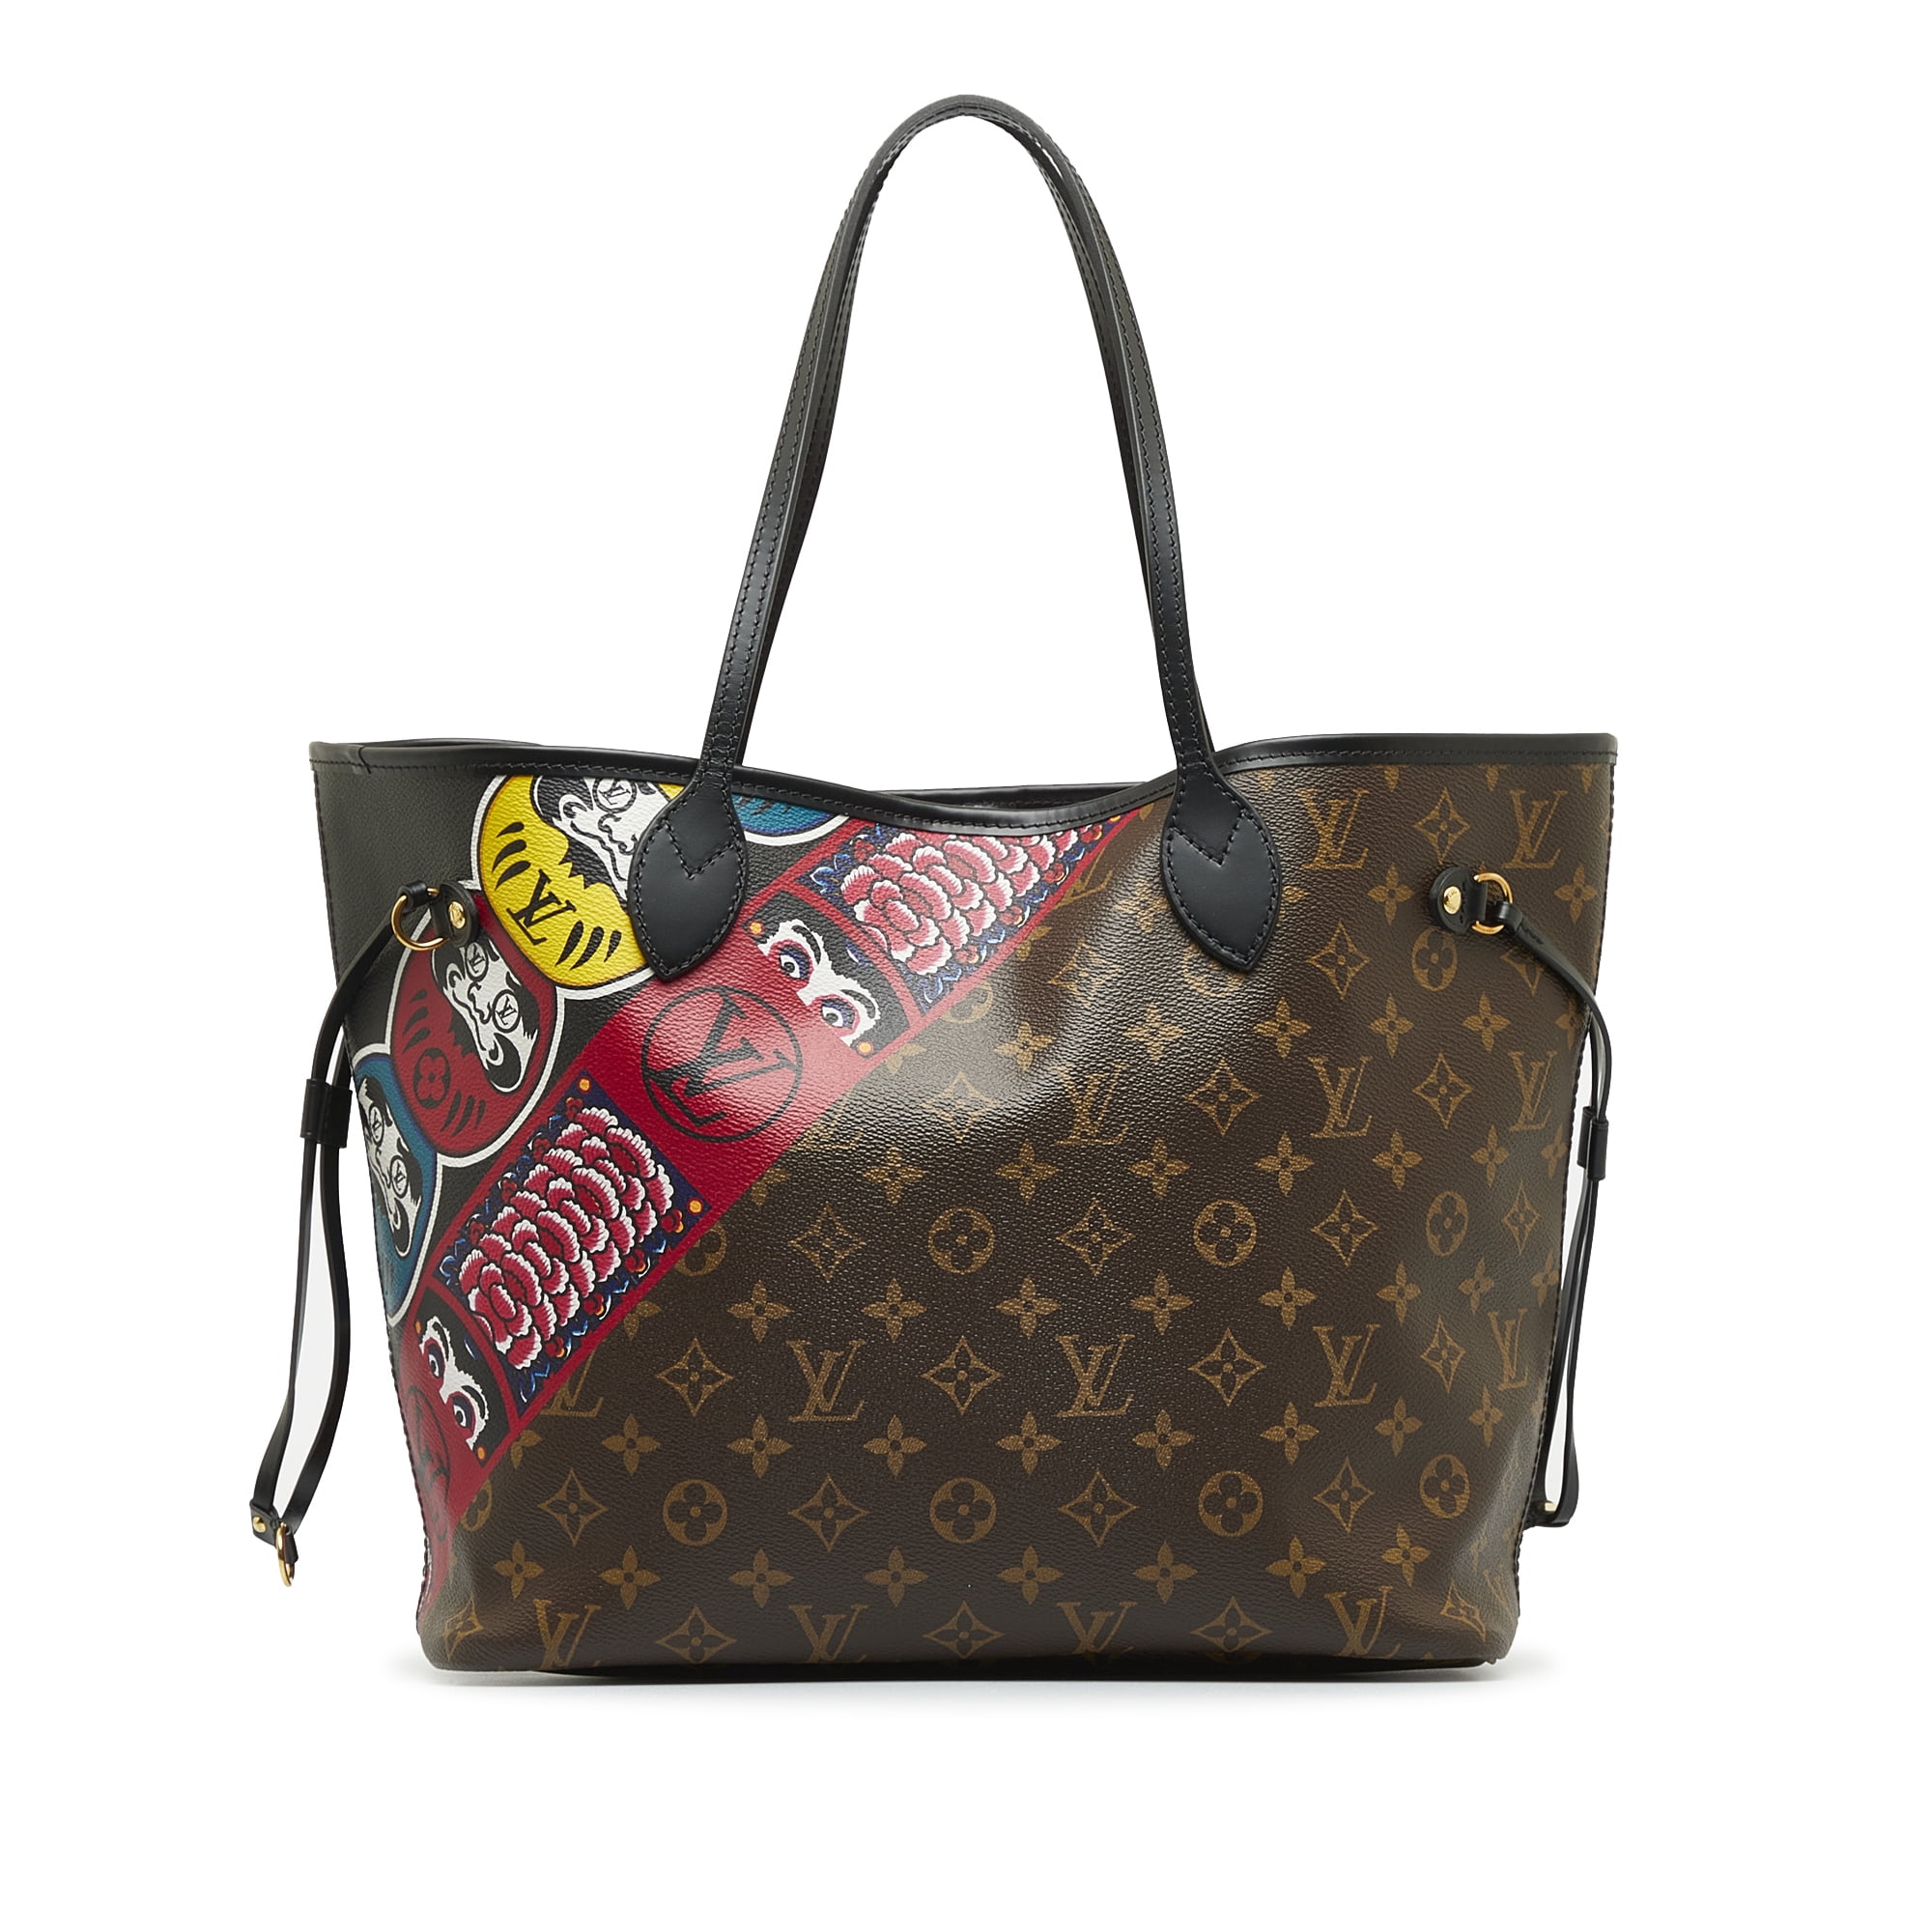 Authenticated Louis Vuitton Monogram Kabuki Neverfull MM Brown Canvas Tote  Bag